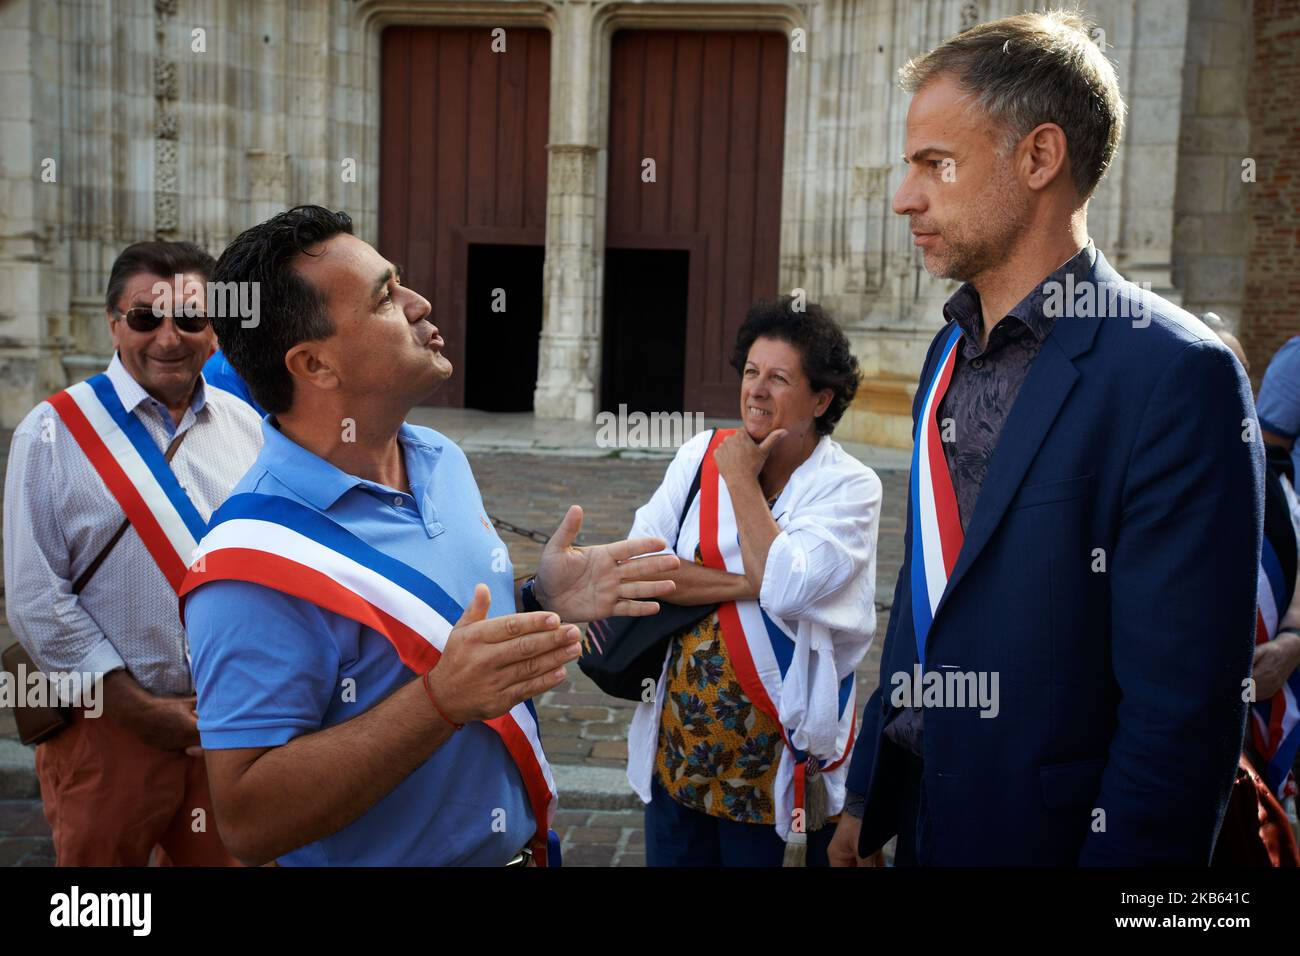 A mayor argues with congressman Sebastion Nadot. Civil servants from the DGFIP (General Directorate of Public Finance) and mayors gathered in front of the Prefecture of Haute-Garonne to protest against the Darmanin's plan to close down tax offices across France. Darmaninis the finance minister. In the Haute-Garonne department, 25 tax offices will be closd and in the Lot-et-Garonne department, for example, all tax offices will be closed before 2023. Toulouse. France. September 16th 2019. (Photo by Alain Pitton/NurPhoto) Stock Photo